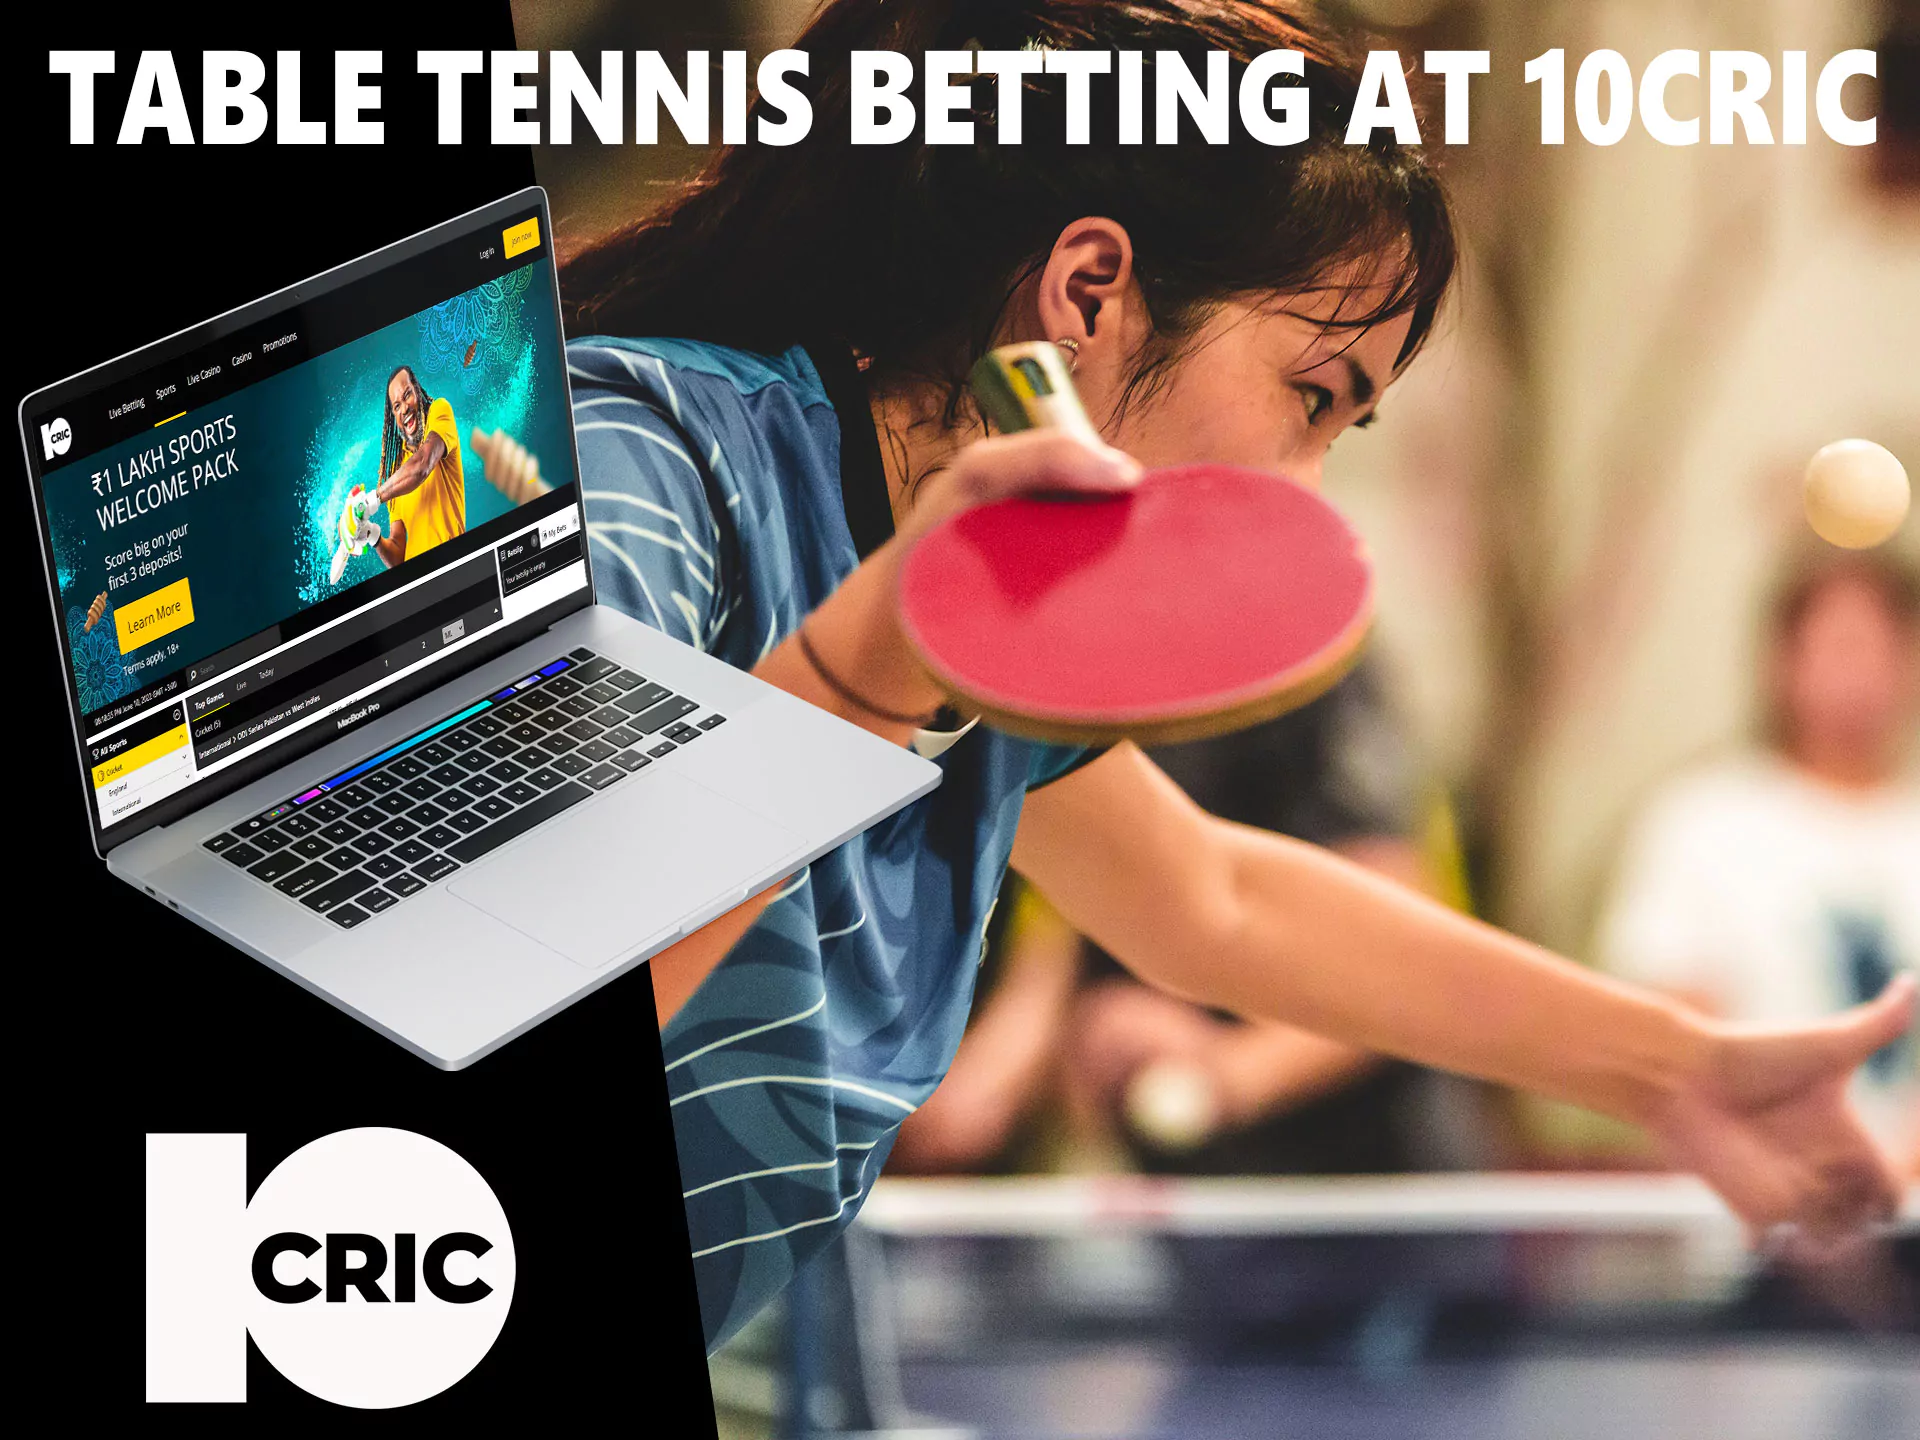 If you are a fan of this sport, then in our article you will find important information on how to bet on this sport at 10Cric.